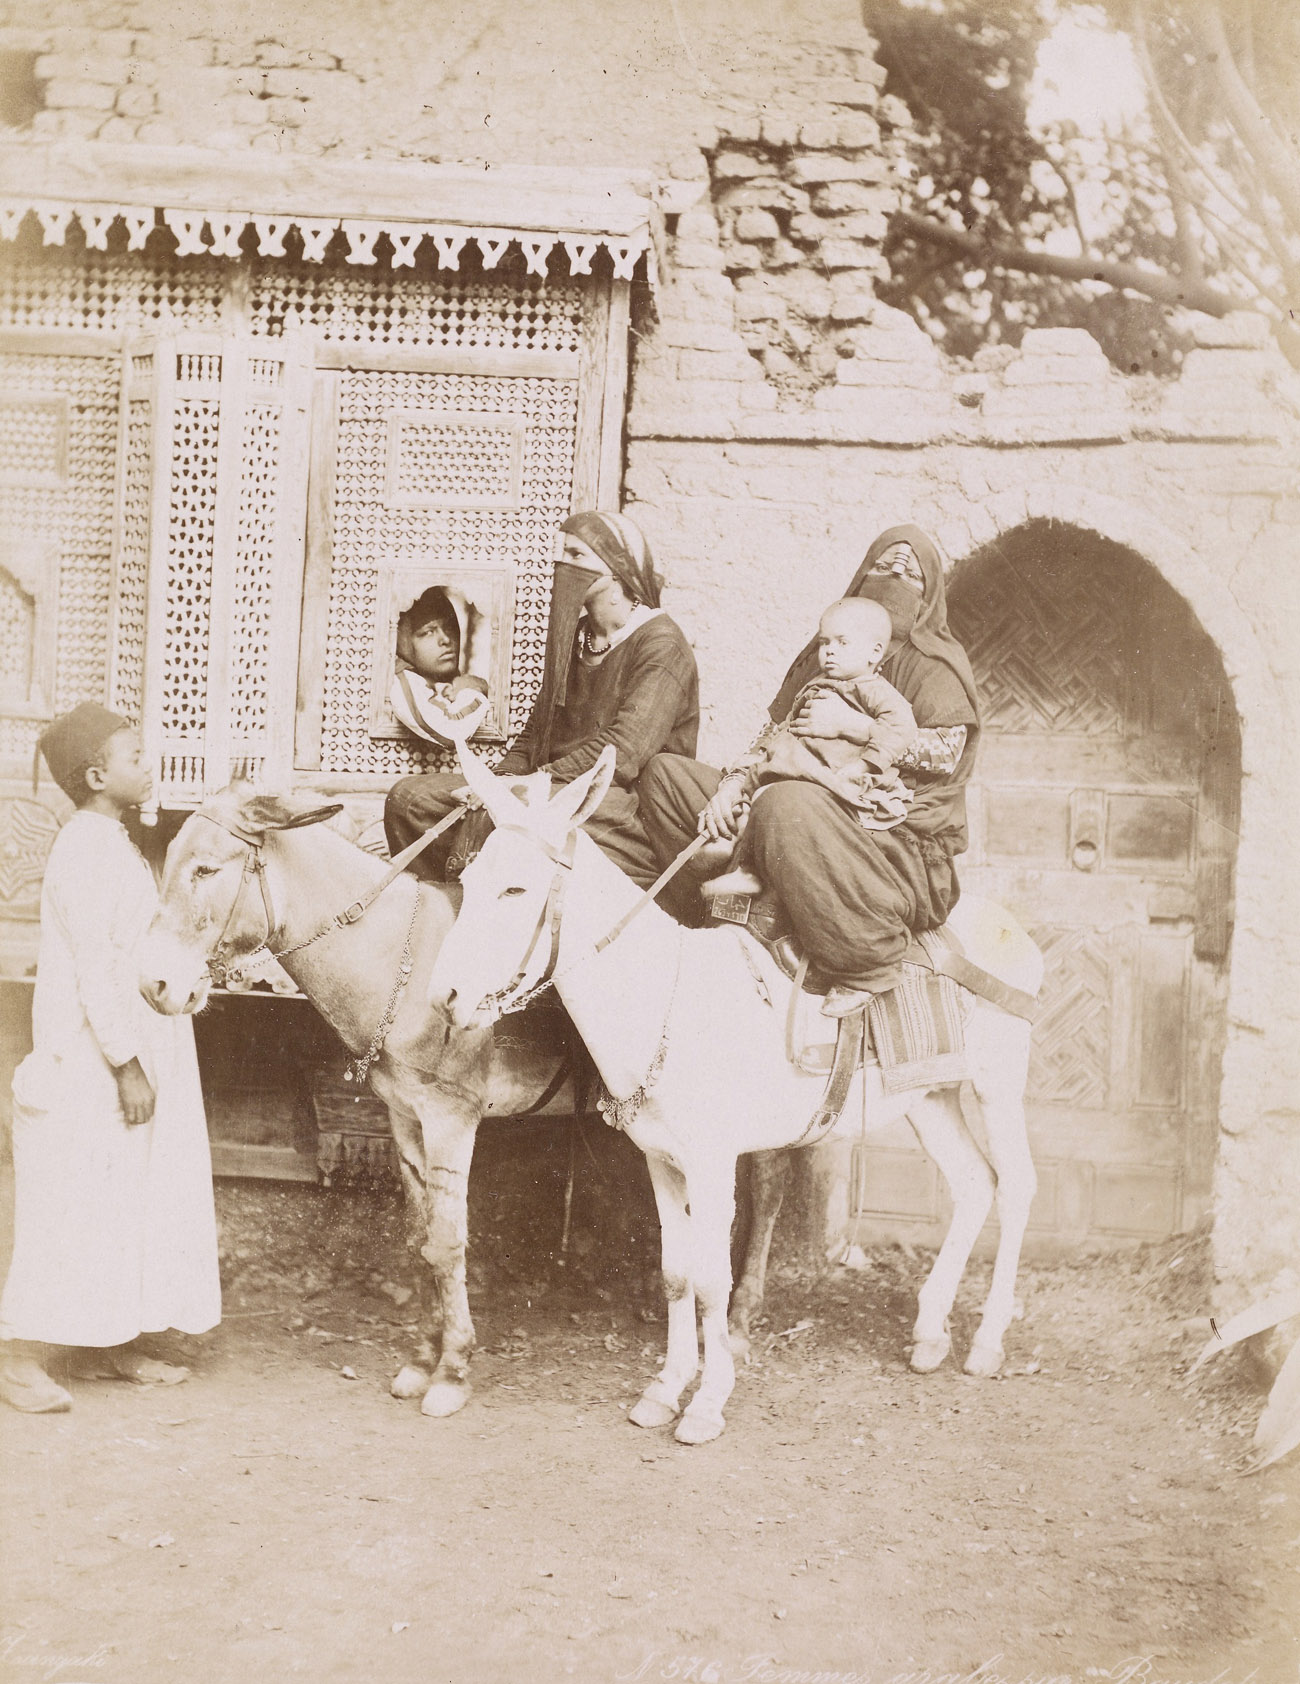 Femmes arabes sur Baudet (Arabic women on donkeys), about 1875, Zangaki Brothers. Unmounted albumen print, 20.5 x 27.7 cm. The Getty Research Institute, 2008.R.3. Ken and Jenny Jacobson Orientalist Photography Collection